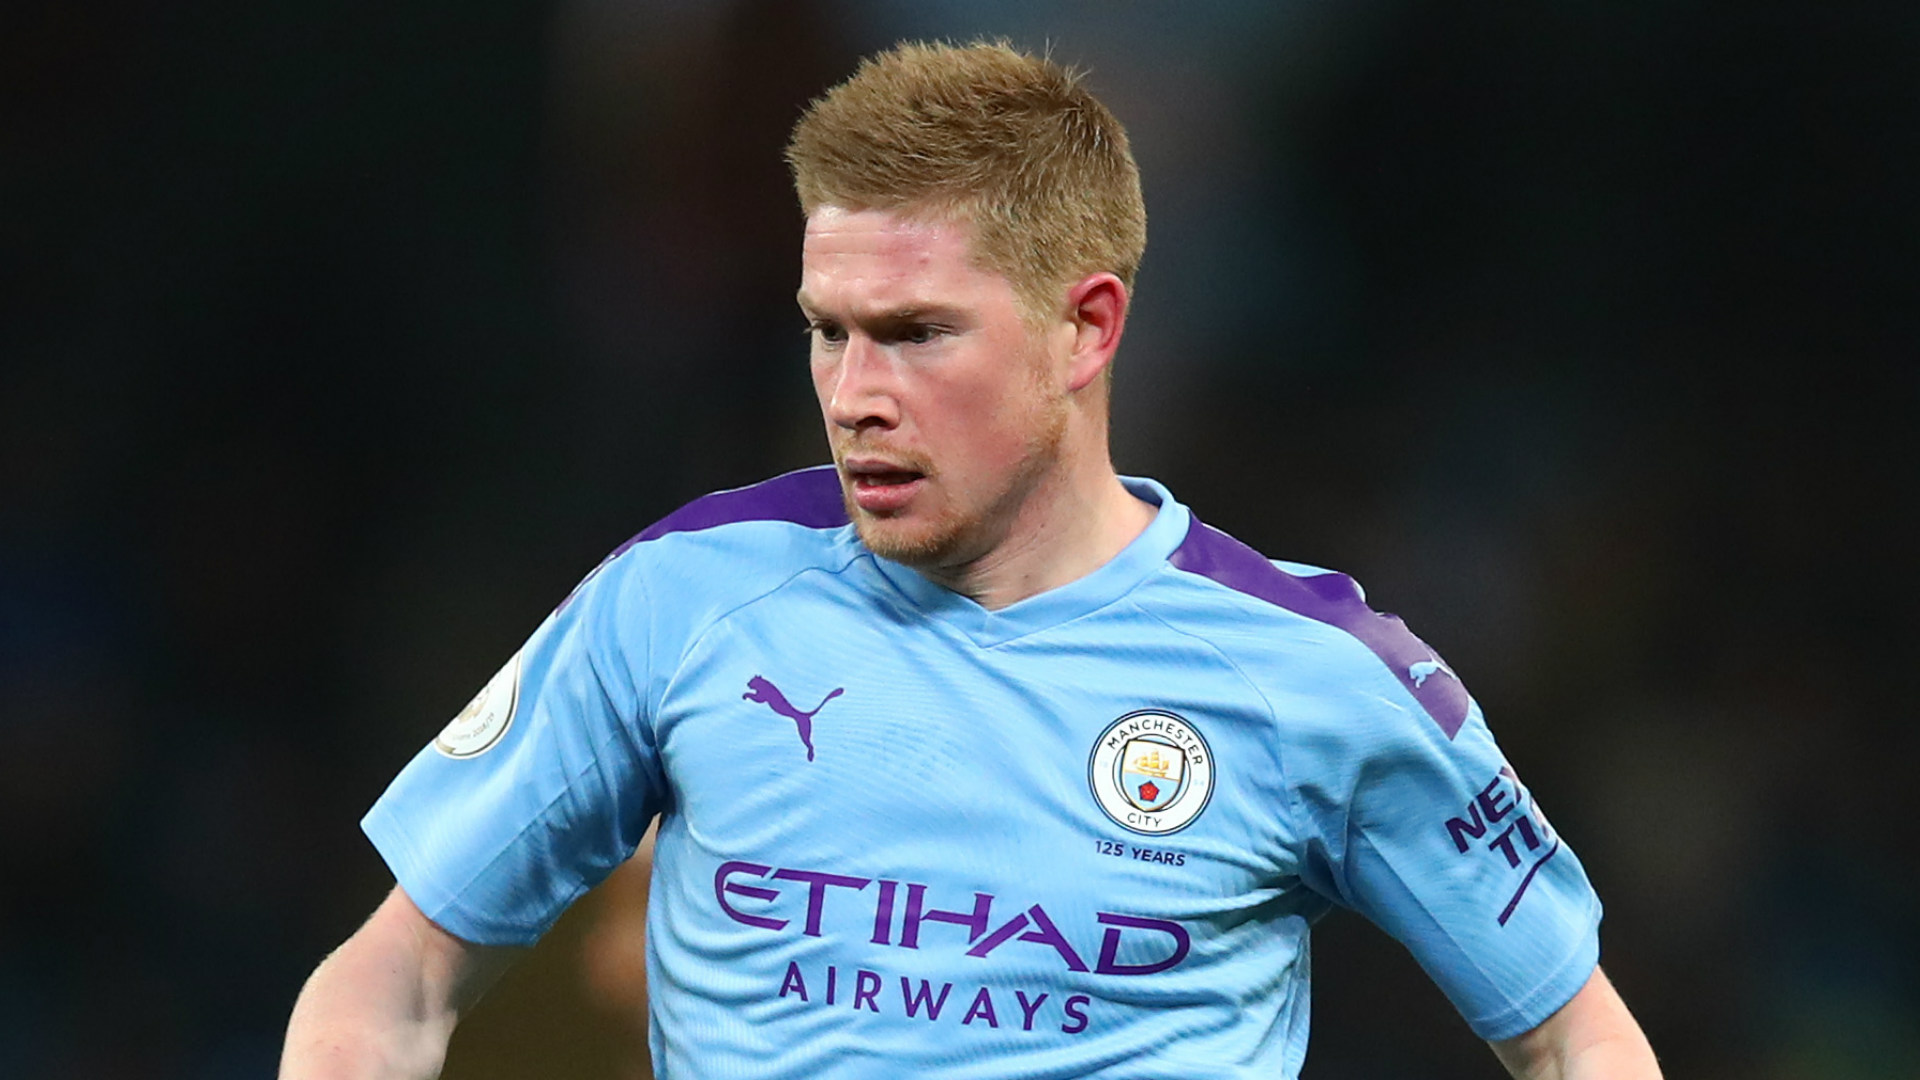 Champions League Ban: De Bruyne Threatens To Leave Man City. kevin-de-bruyn...